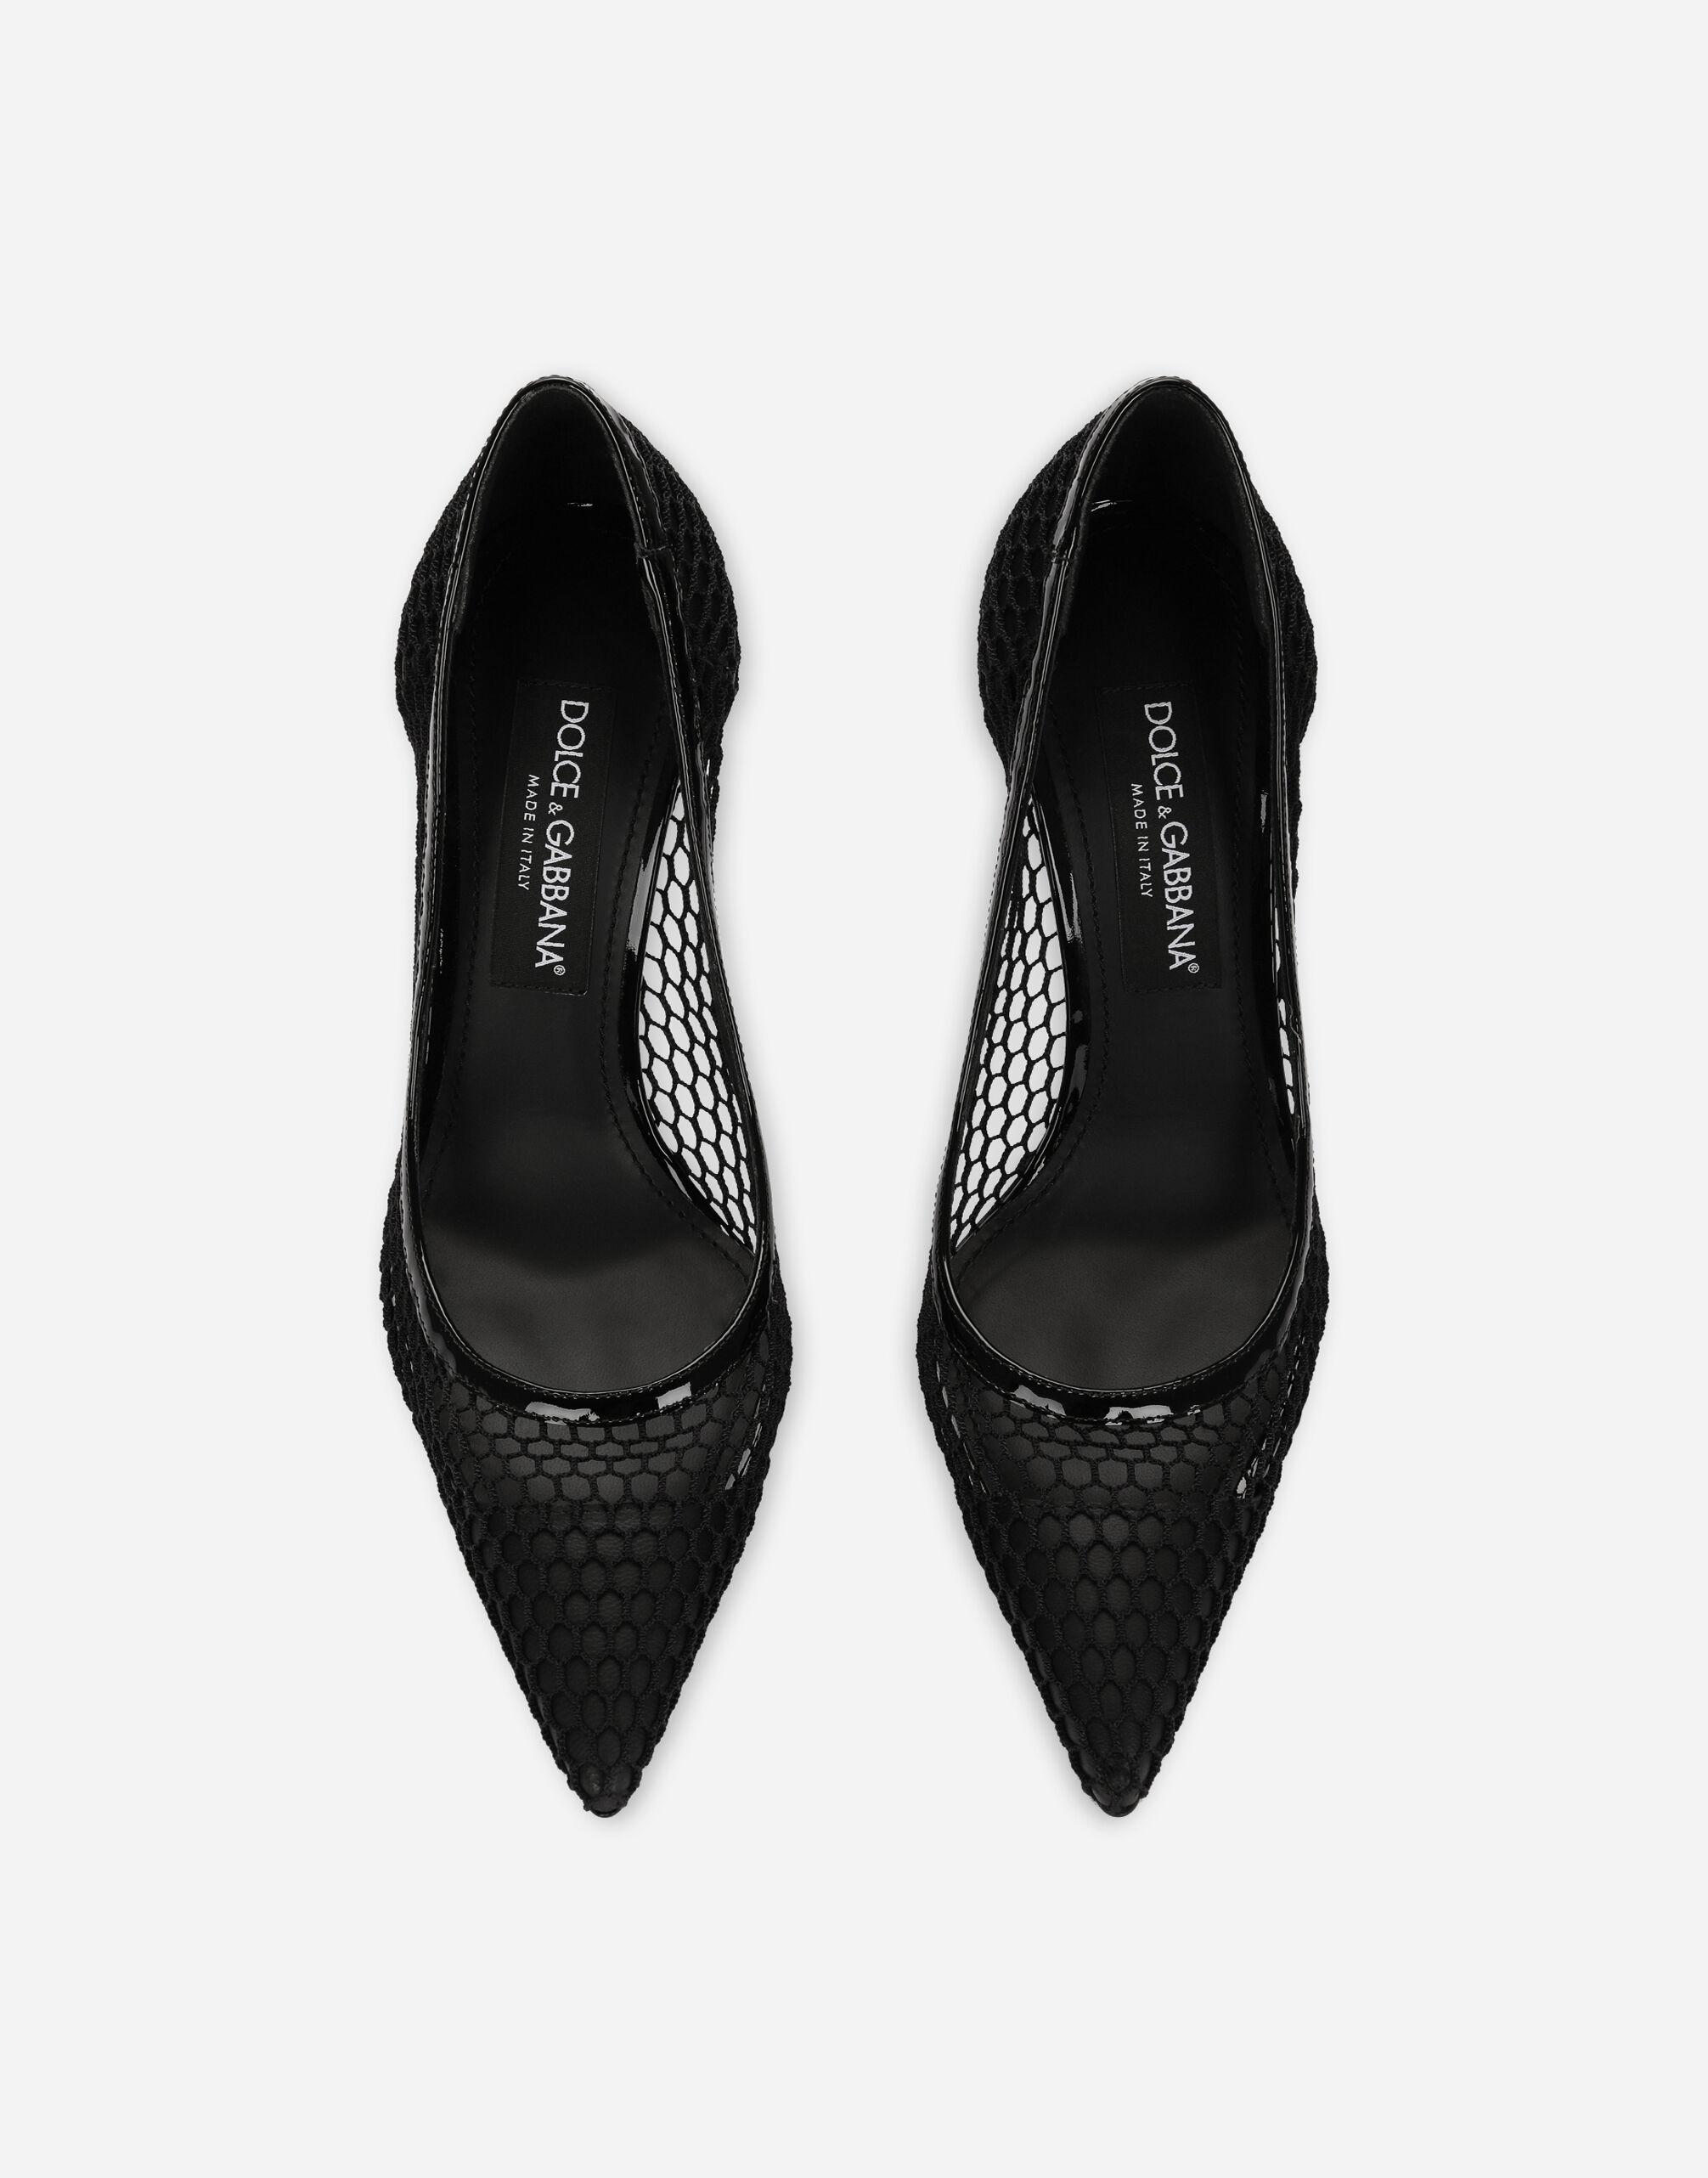 Dolce & Gabbana Mesh And Patent Leather Pumps in Black | Lyst